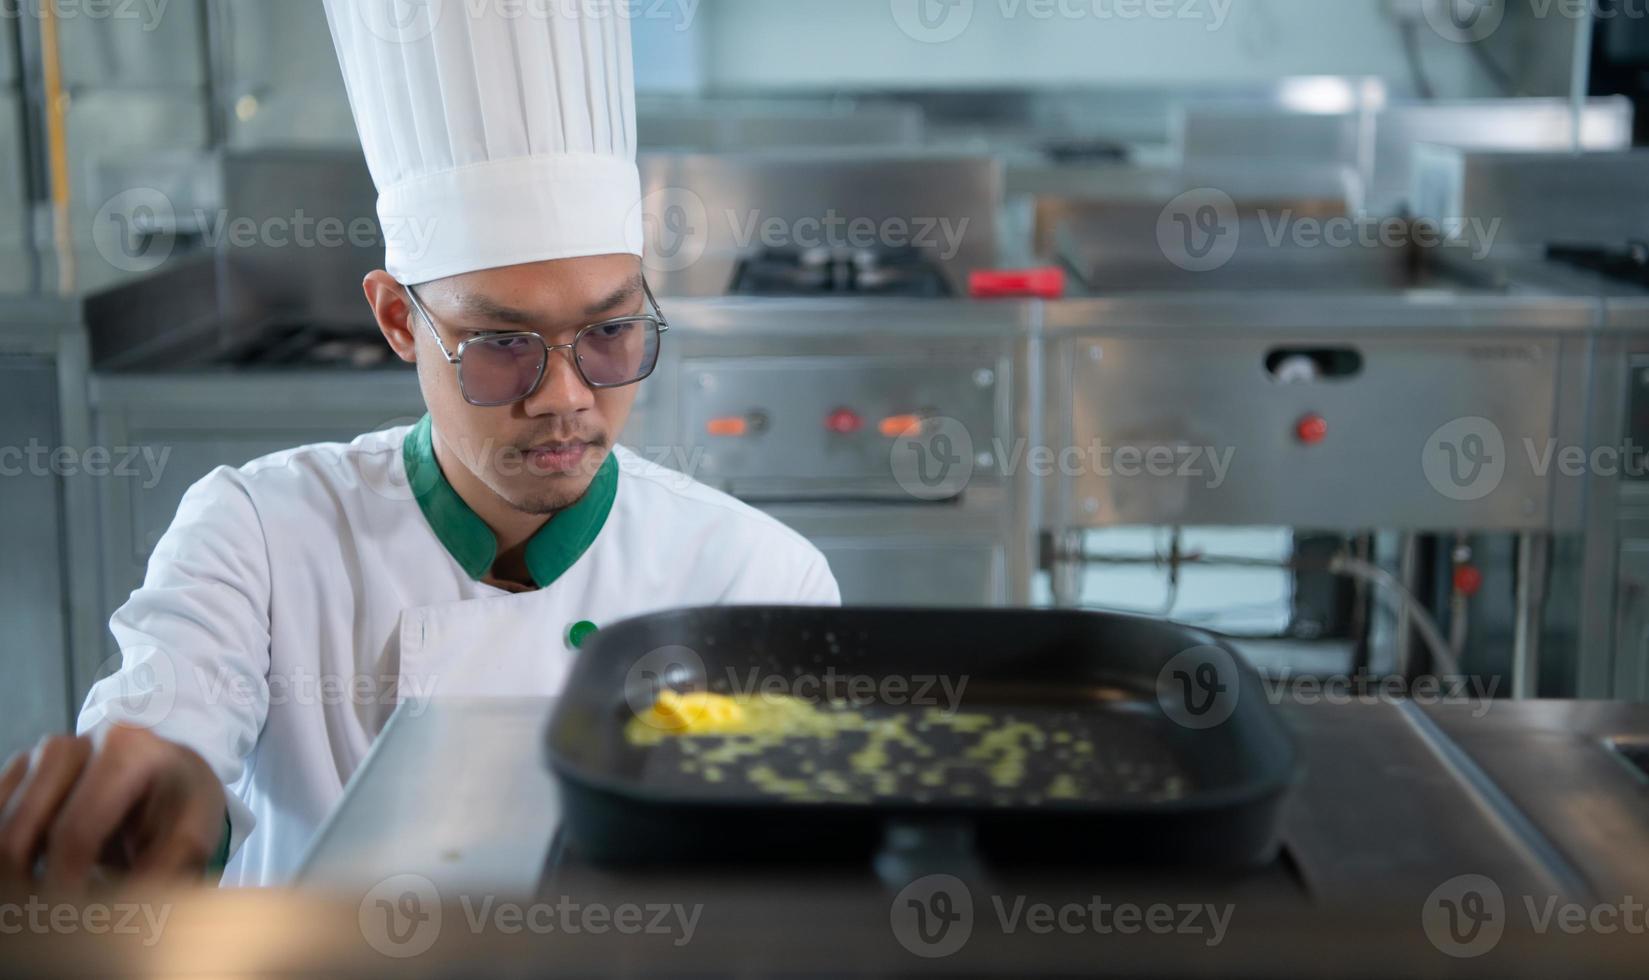 The chef has to control the heat of the stove just right to grill the steak so that the ripeness of the meat is according to the customer's desire photo